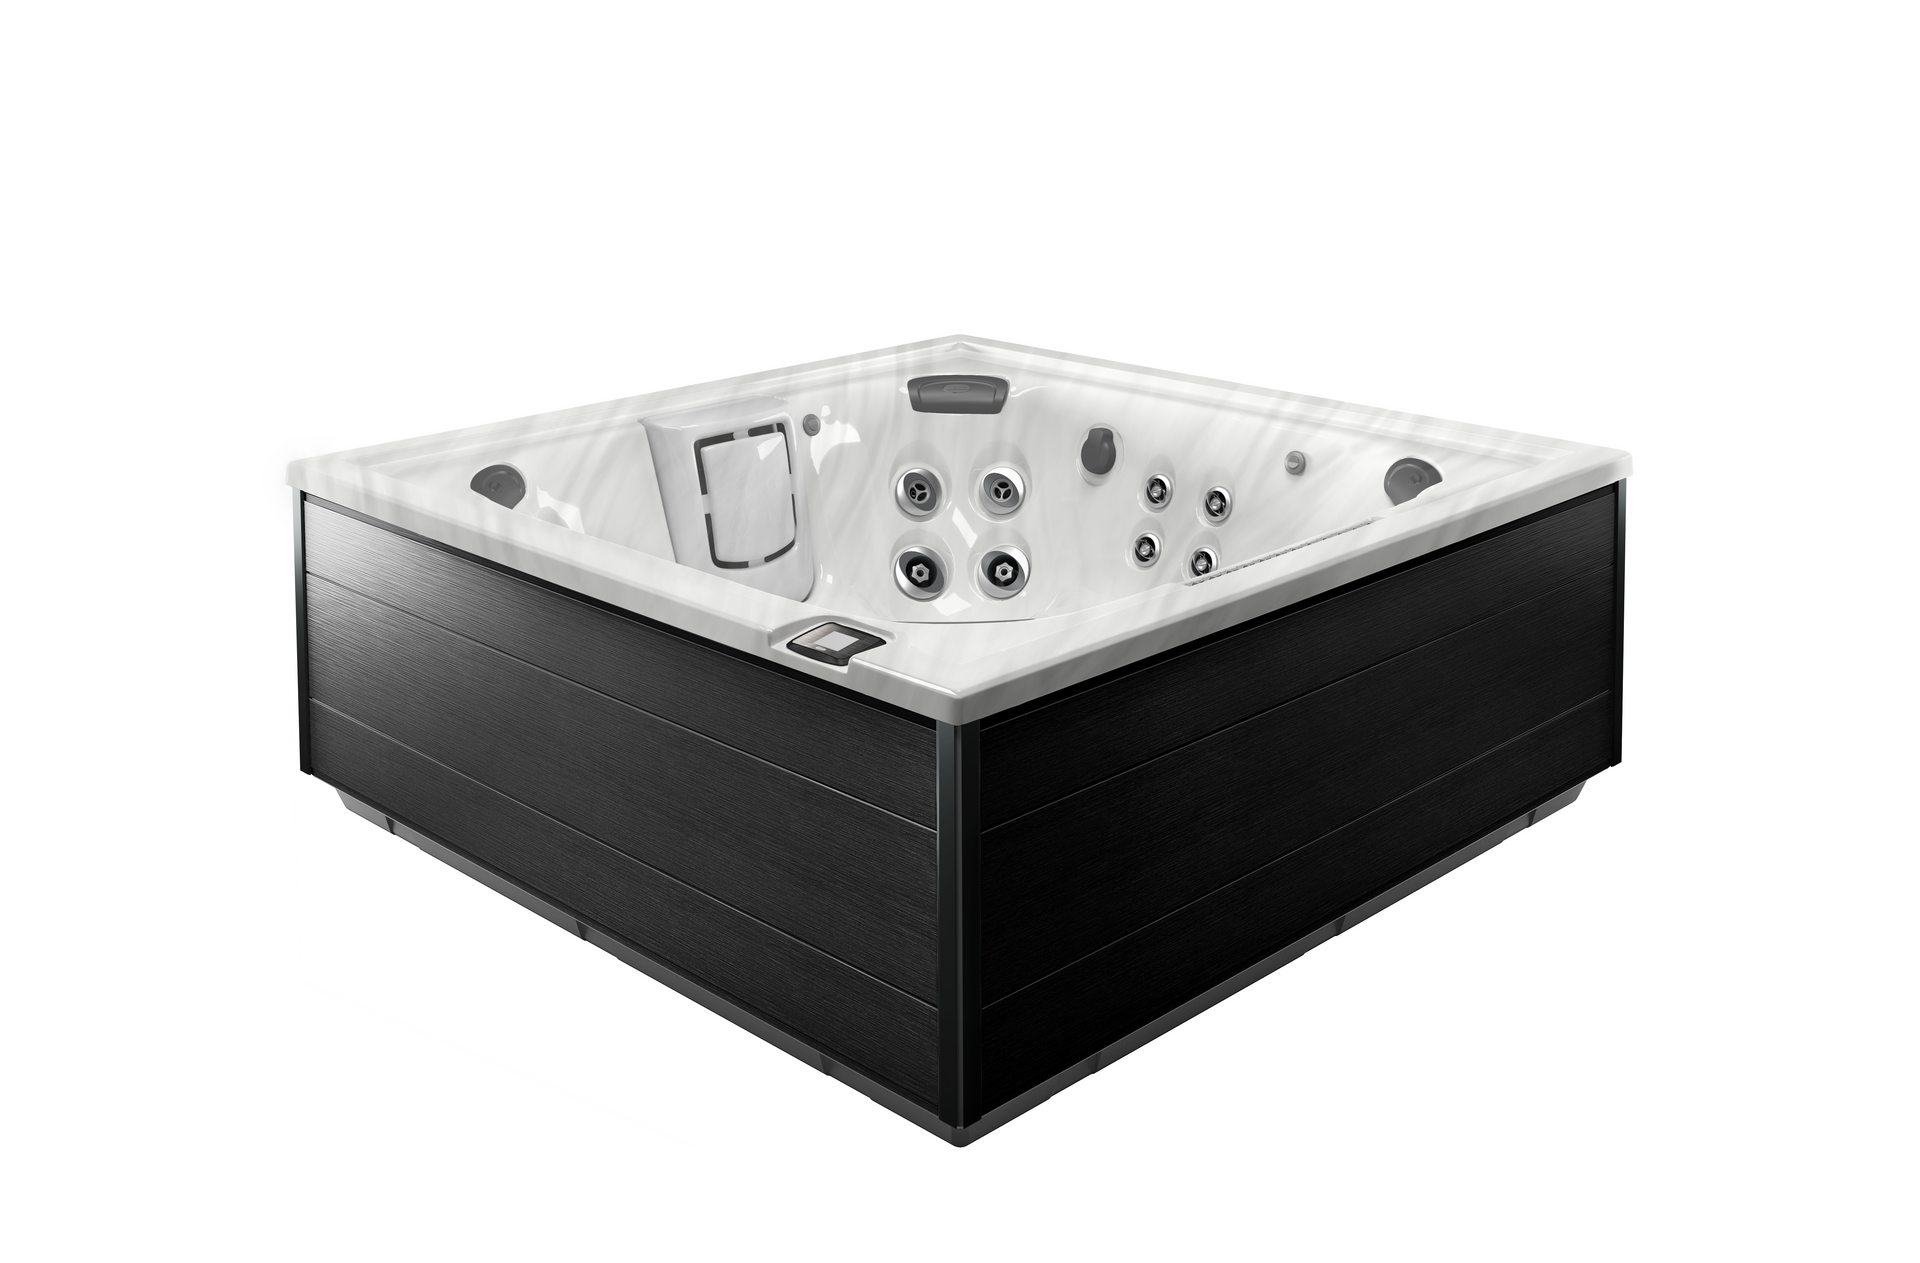 The  J-LX By Jacuzzi Offers Strategically Placed & Customizable Jets